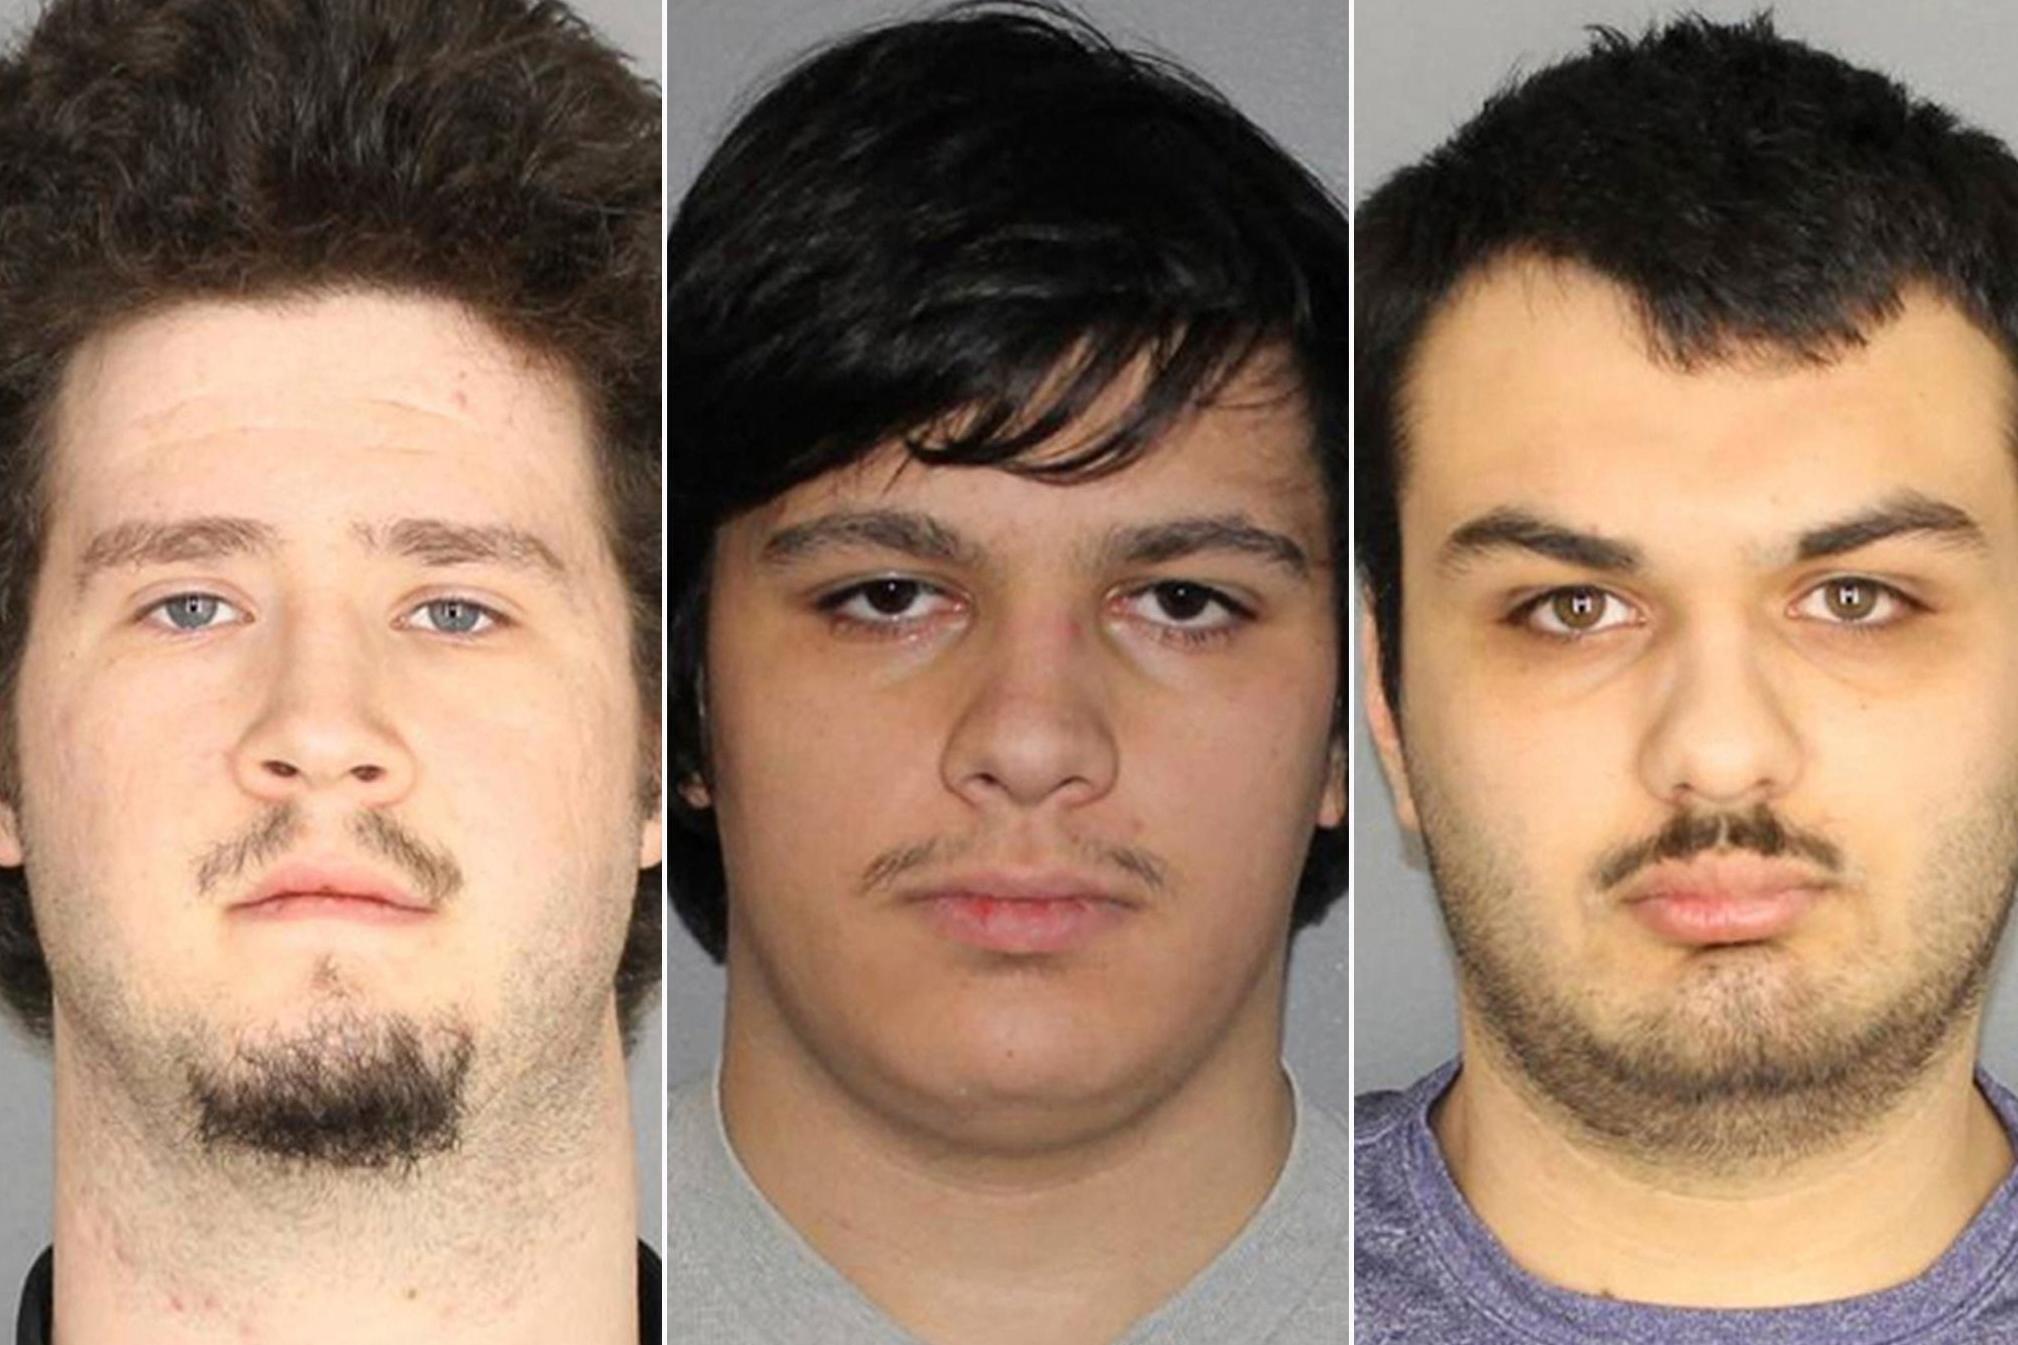 (l to r) Brian Colaneri, Andrew Crysel and Vincent Vetromile have been accused of plotting an attack against Muslims